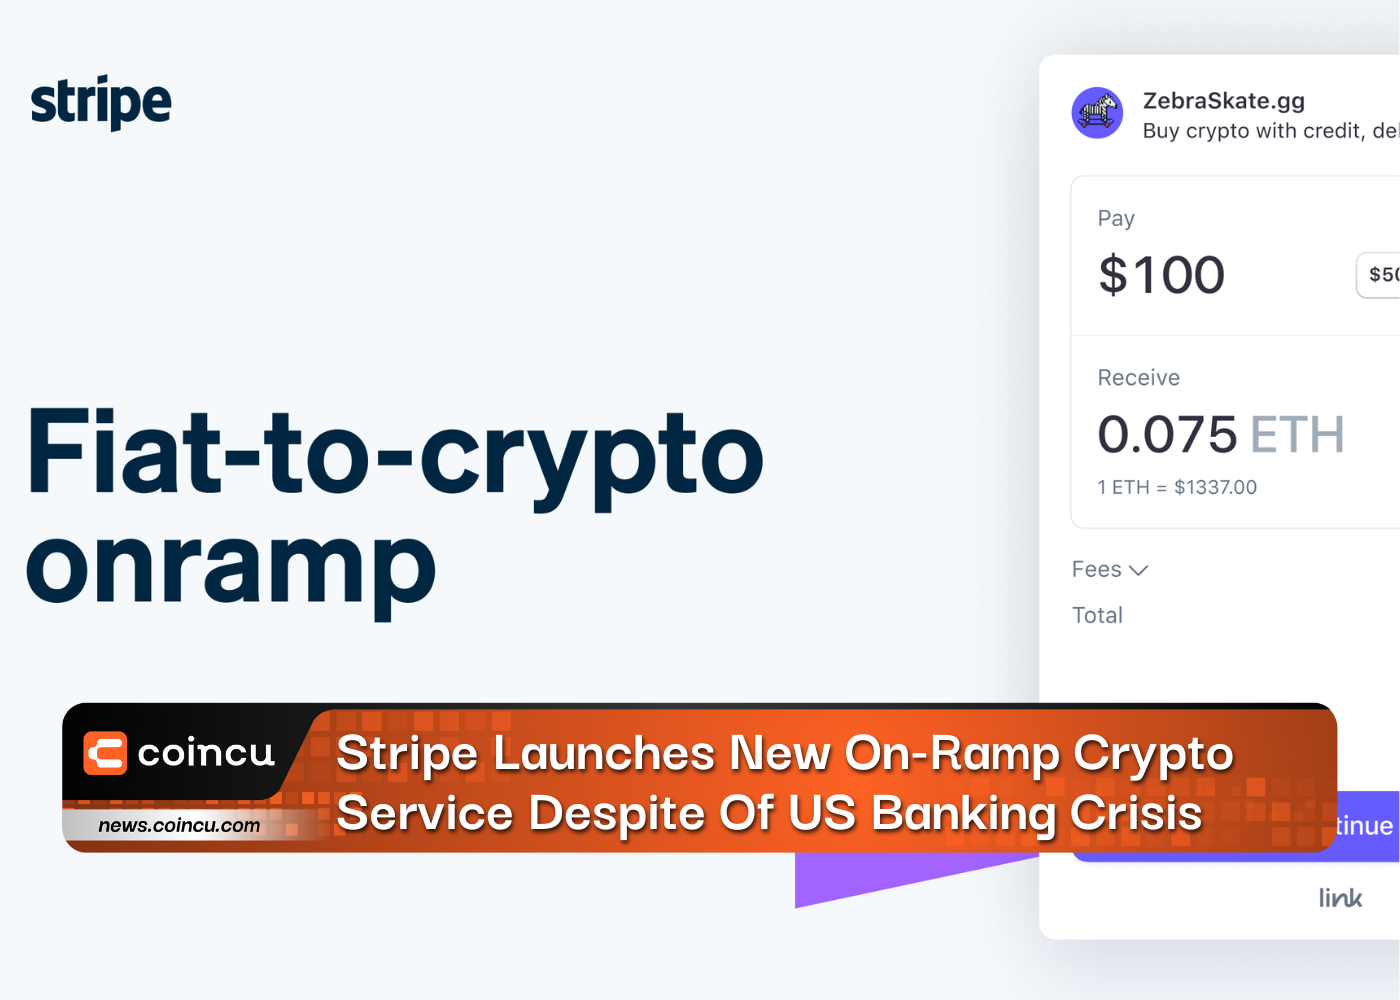 Stripe Launches New On-Ramp Crypto Service Despite Of US Banking Crisis